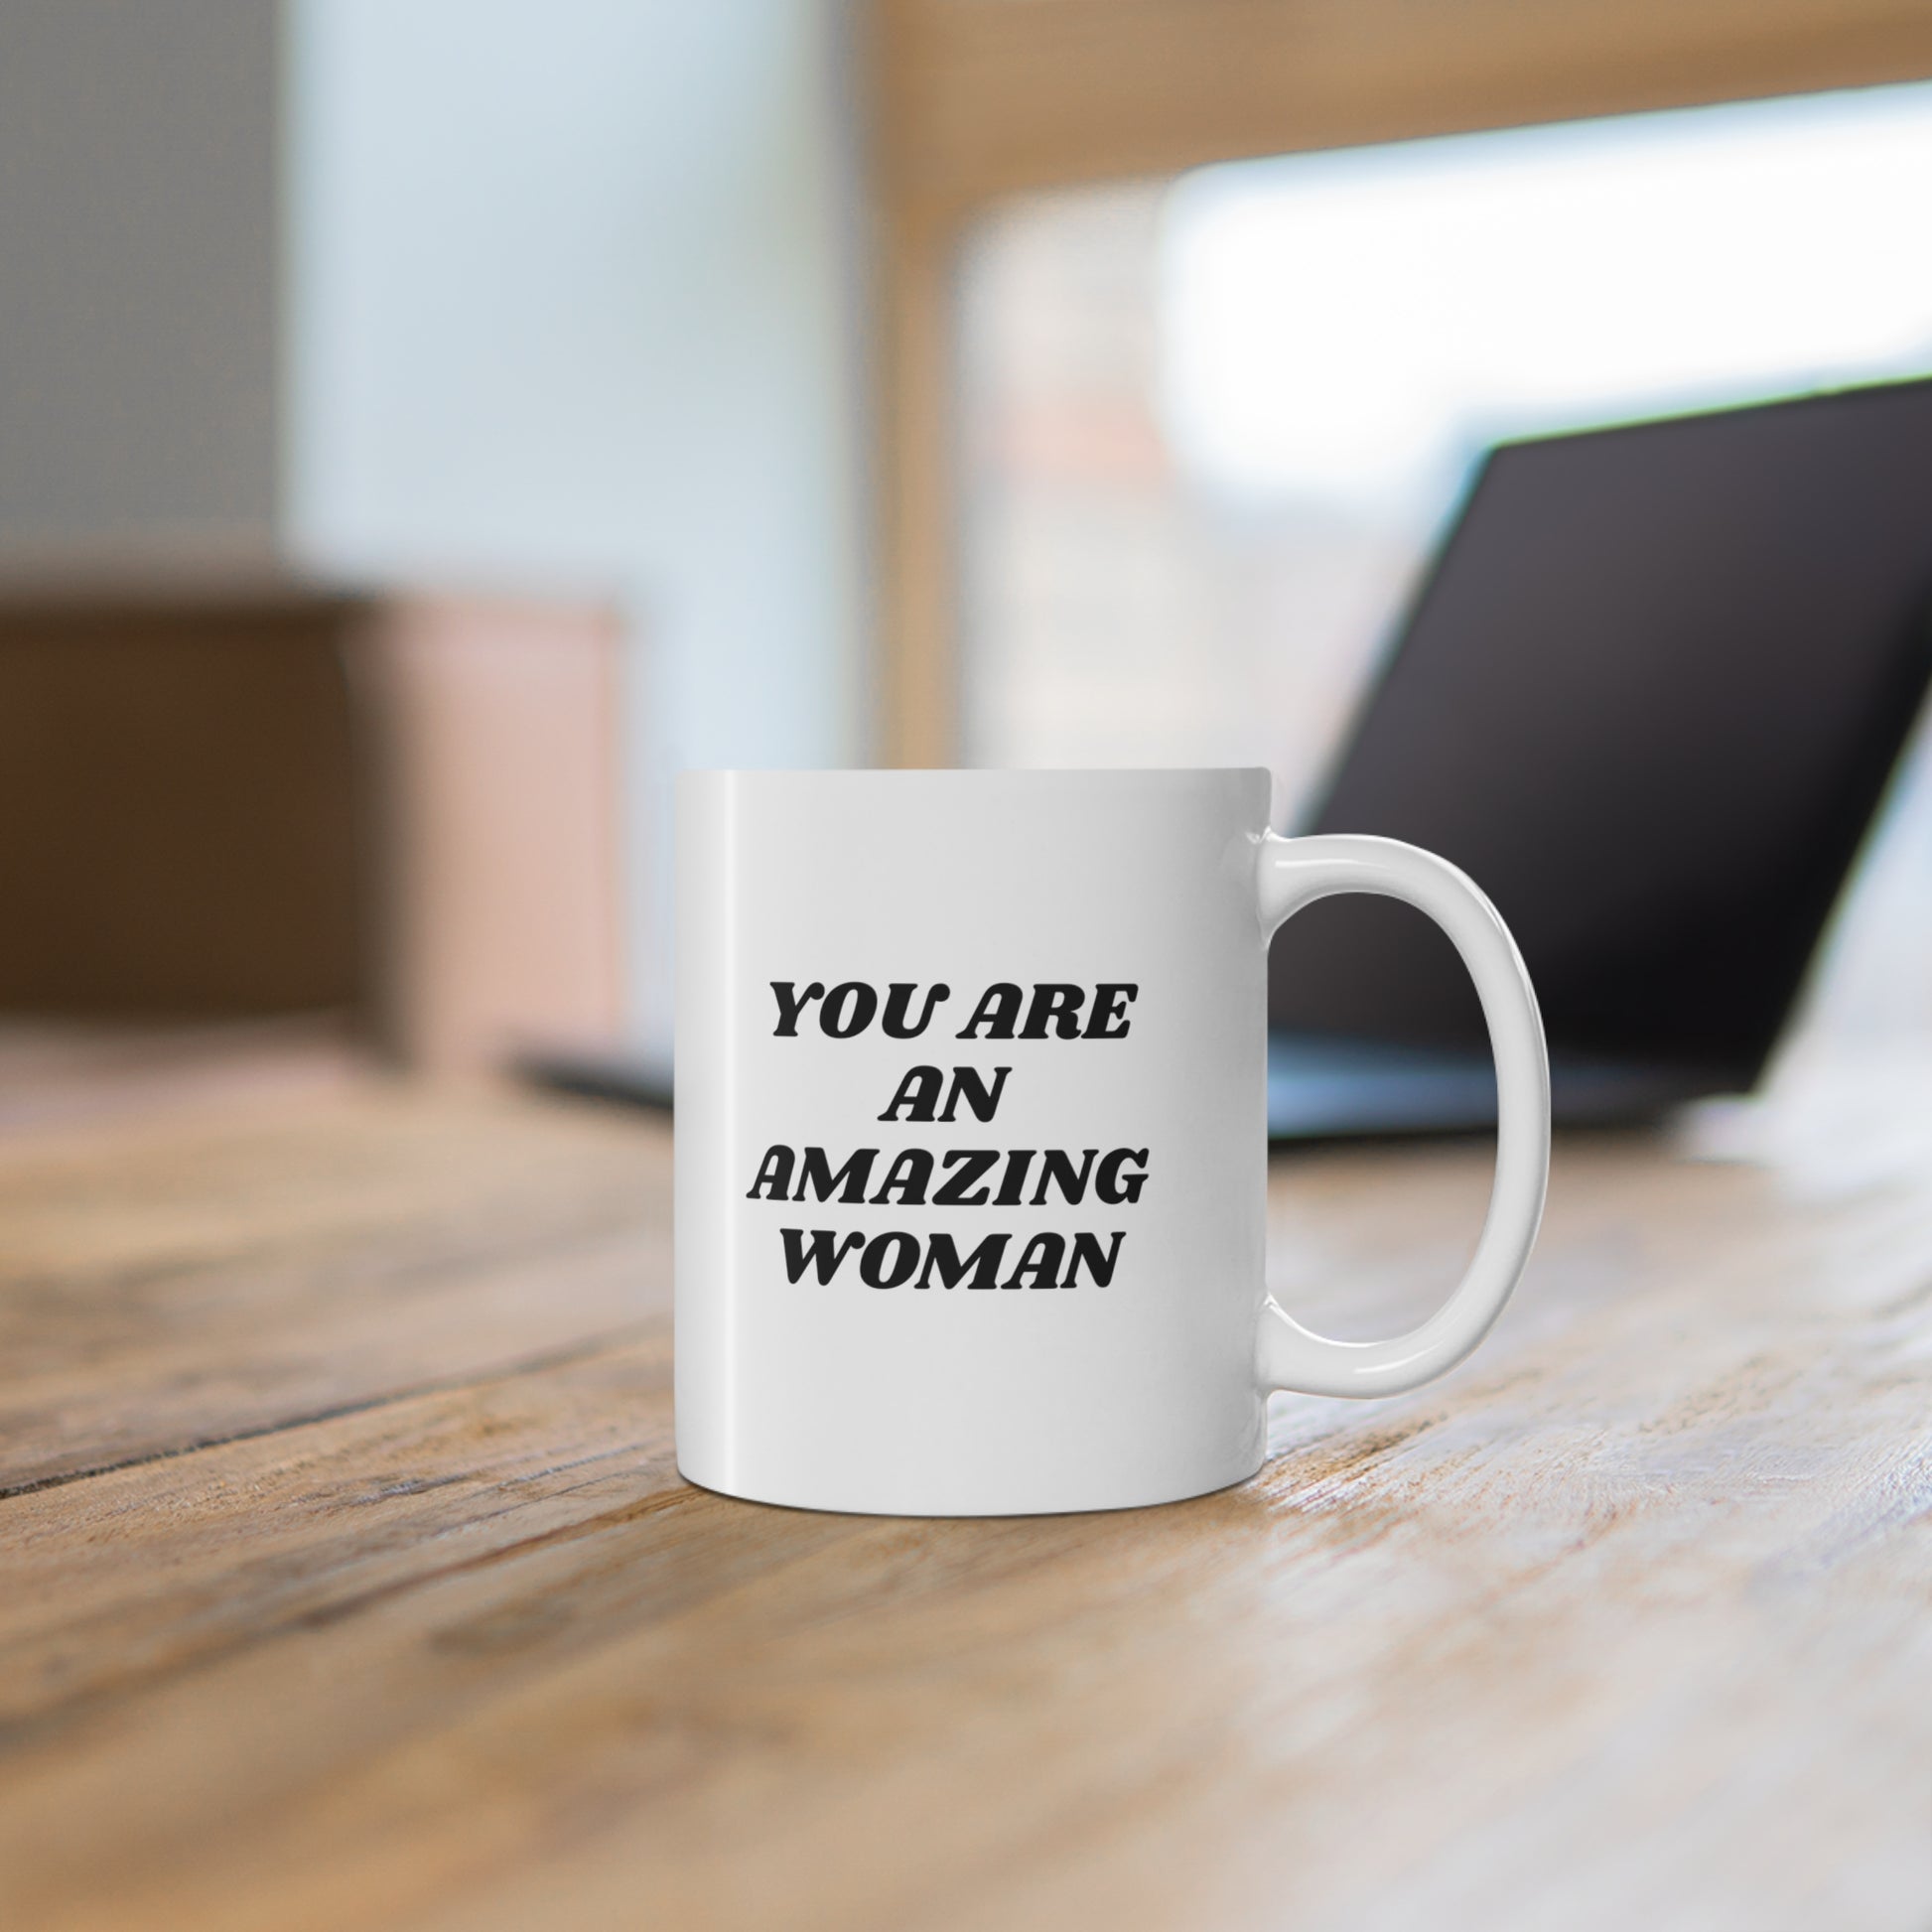 11oz ceramic mug with quote You are an amazing woman